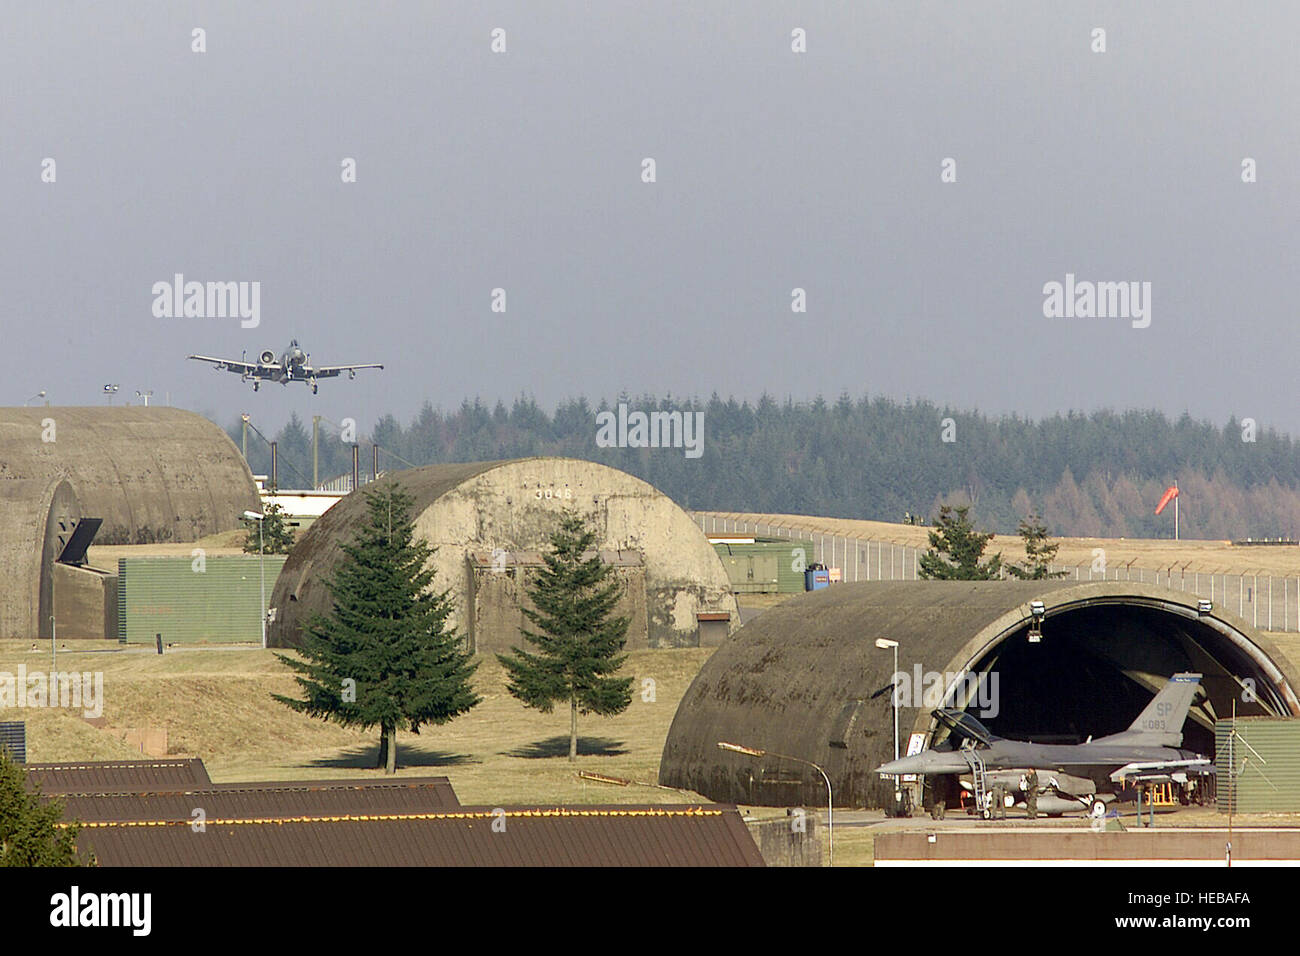 A US Air Force (USAF) A-10 Thunderbolt II aircraft (background) from the 81st Fighter Squadron (FS), 52nd Fighter Wing (FW), flies a familiarization flight down the newly constructed North Atlantic Treaty Organization (NATO) runway at Spangdahlem Air Base, Germany, in preparation for the changes taking effect due to the Rhein-Main Transition Project. A USAF F-16C Fighting Falcon aircraft is visible foreground right. Stock Photo